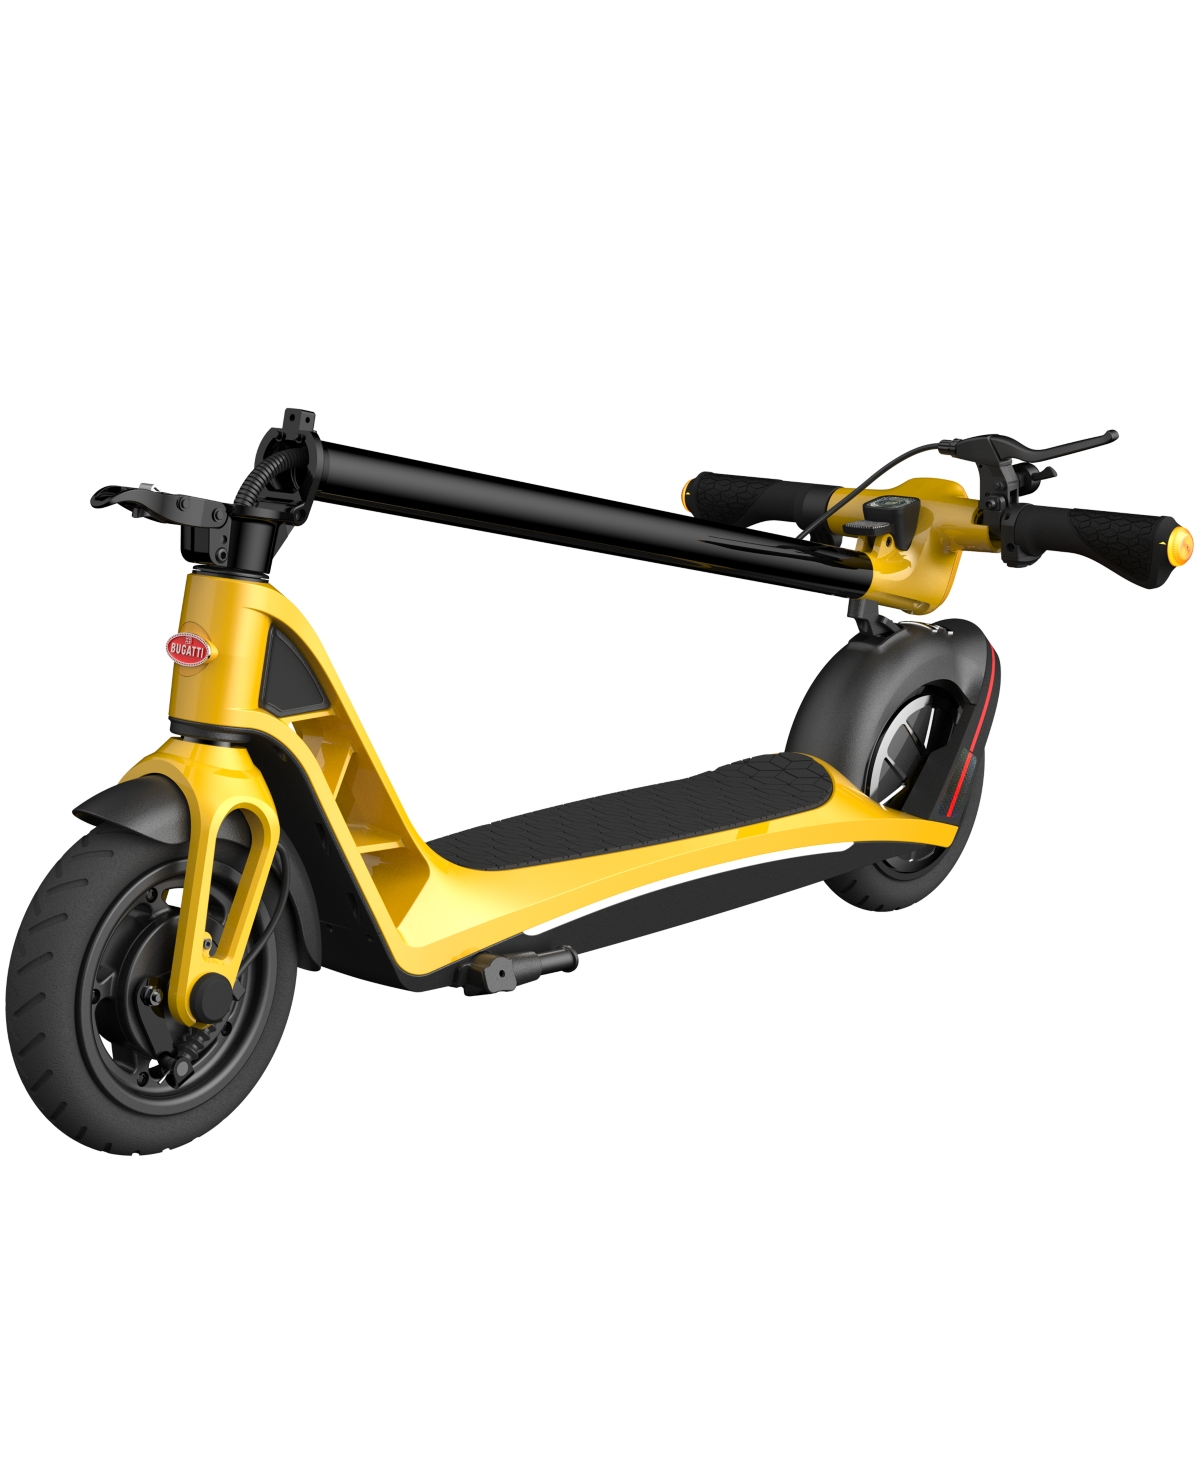 Shop Bugatti 09 Electric Ride On Scooter In Yellow